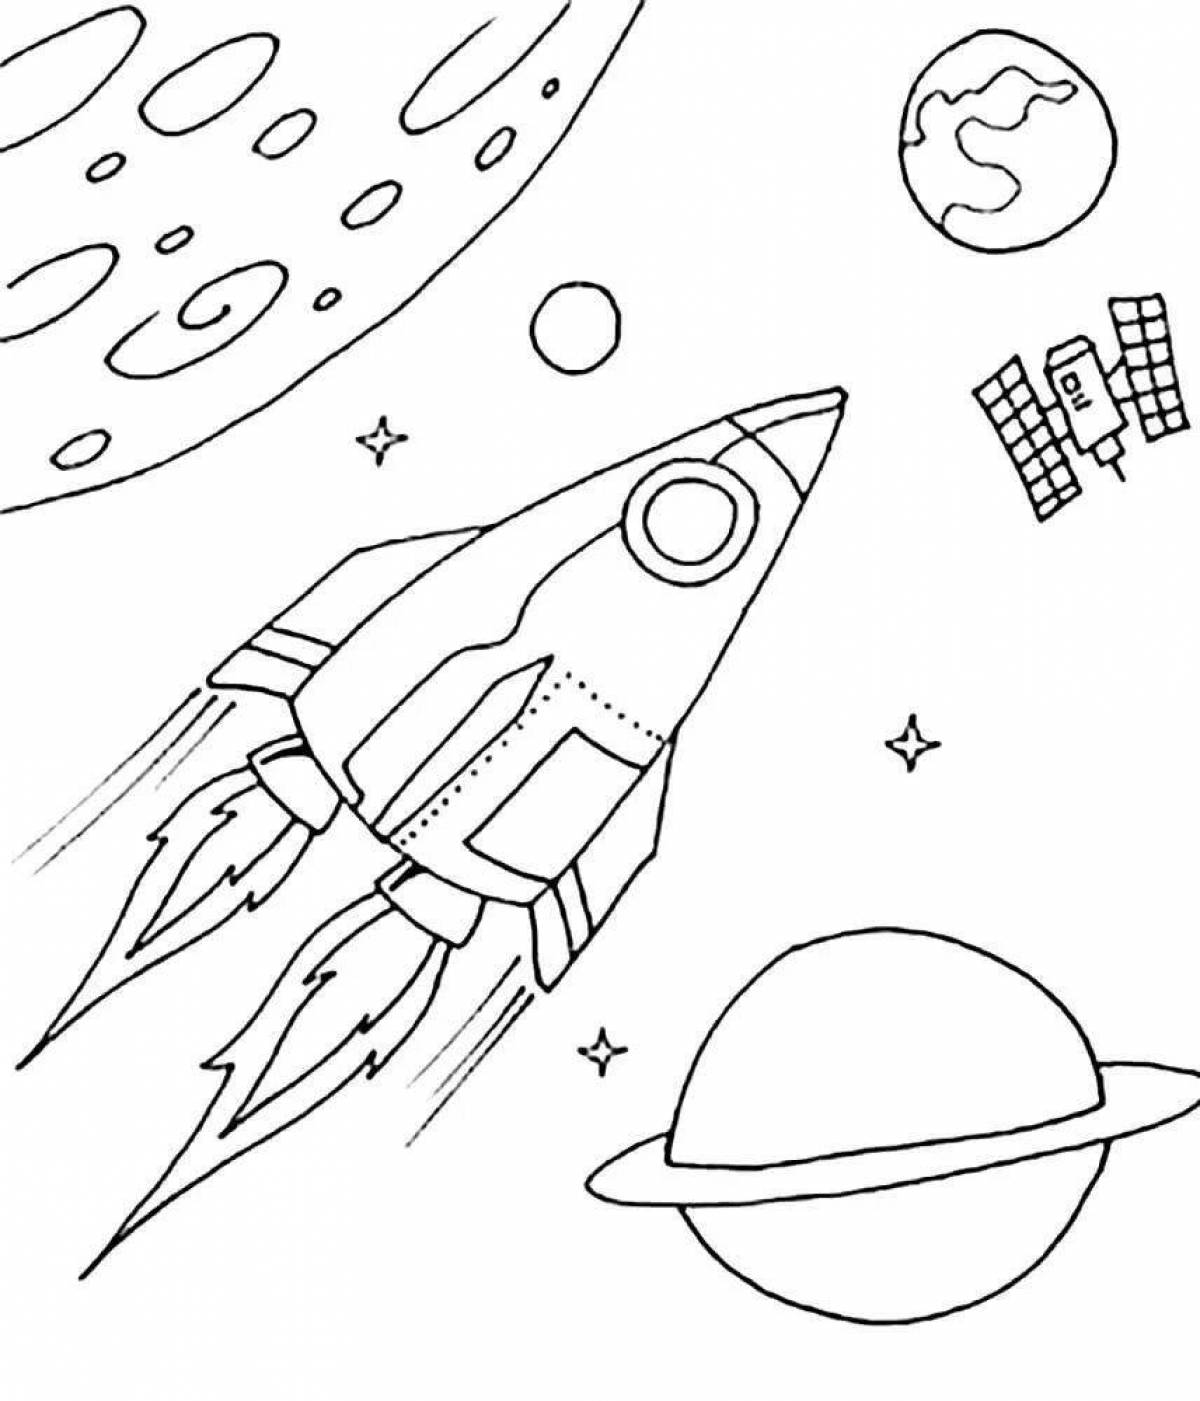 Majestic space 1st grade coloring page